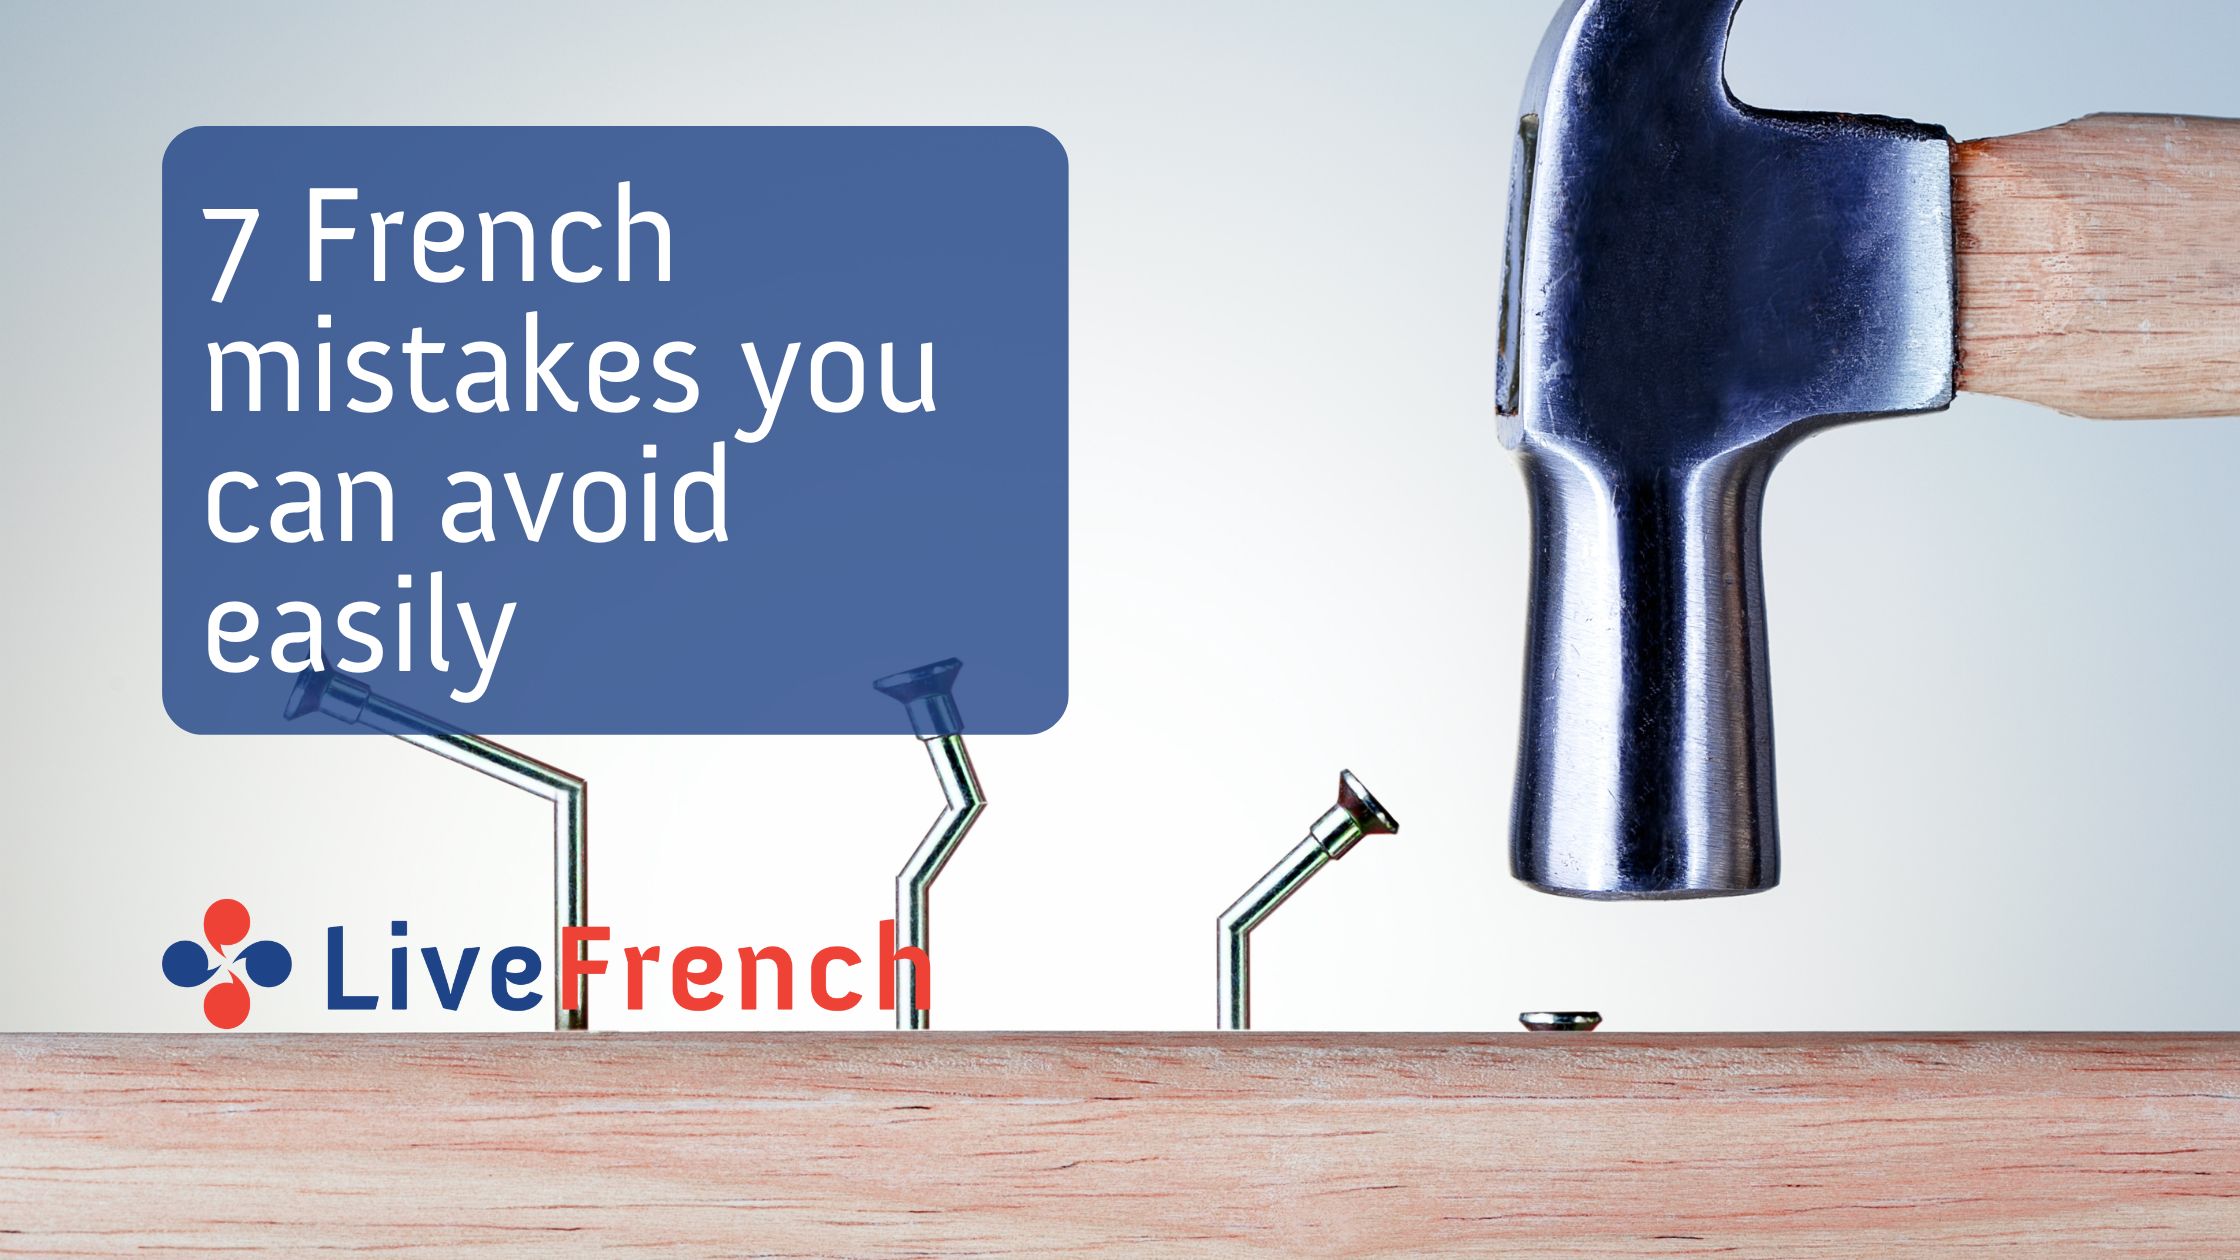 7 French mistakes you can avoid easily